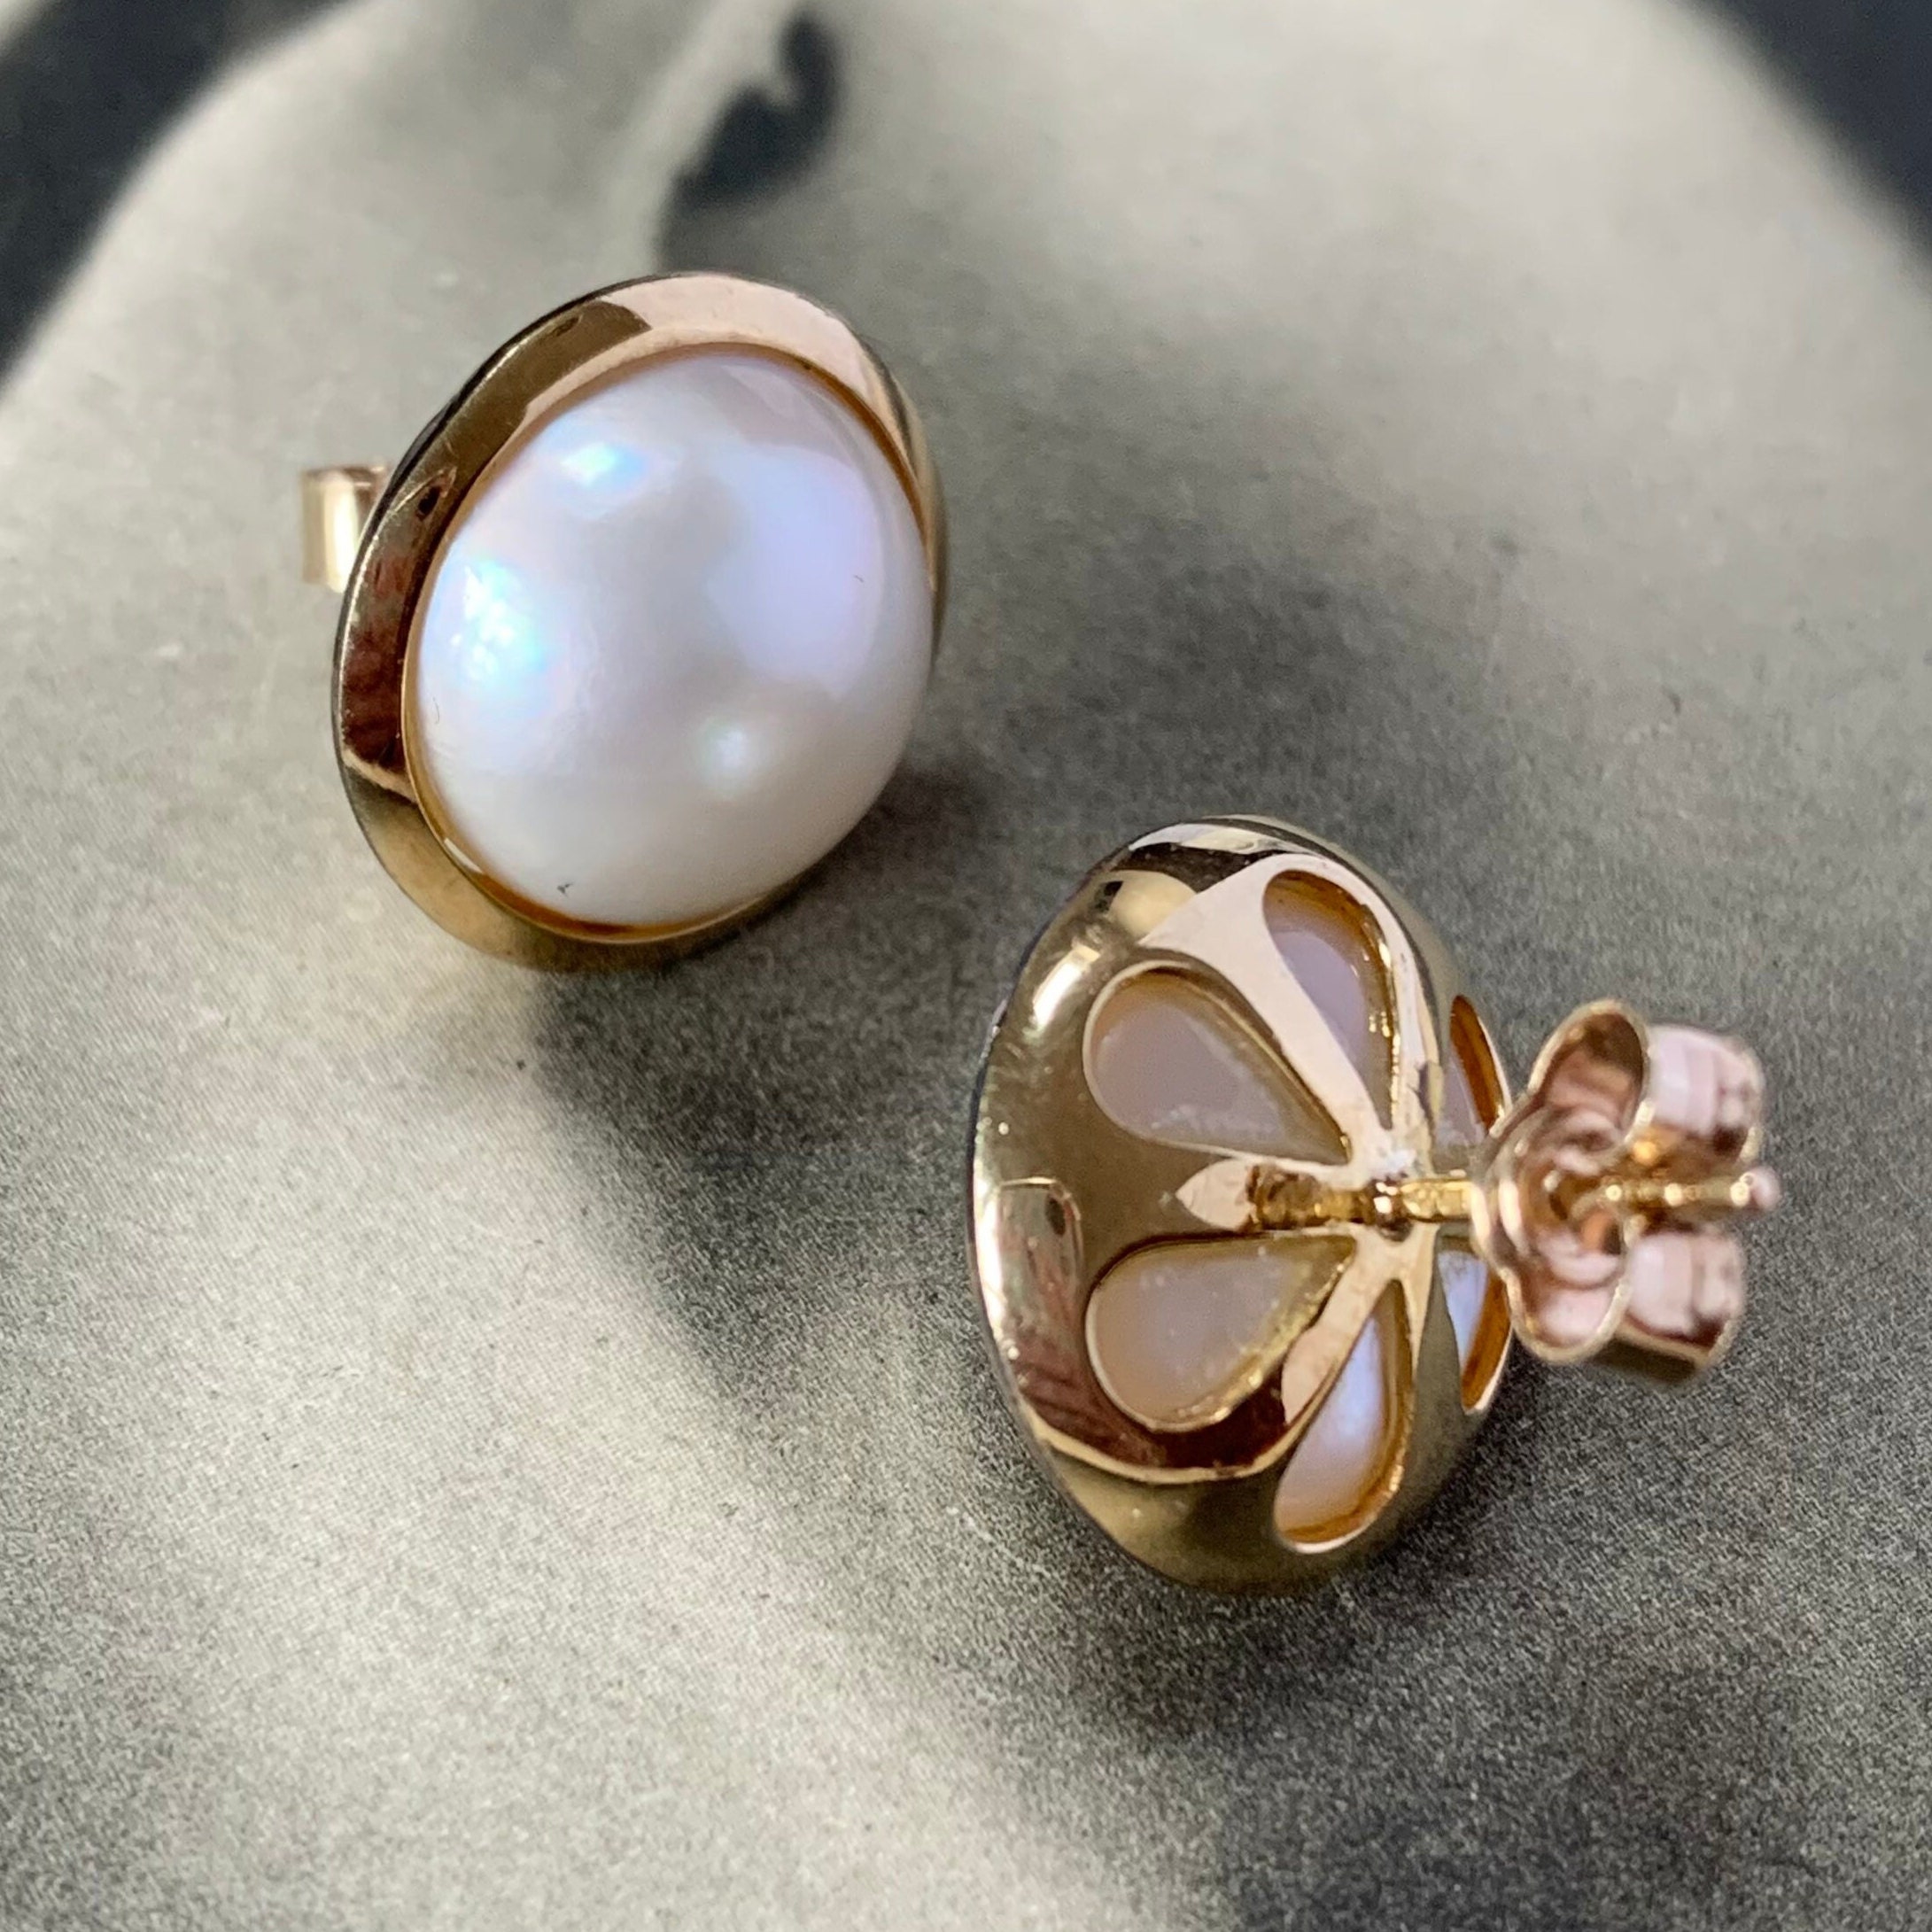 Earrings Feature A Generous-Sized Mabe Pearls Securely Set in Bezel Settings, & Are Suitable For Pierced Ears With Butterfly Back Fitting